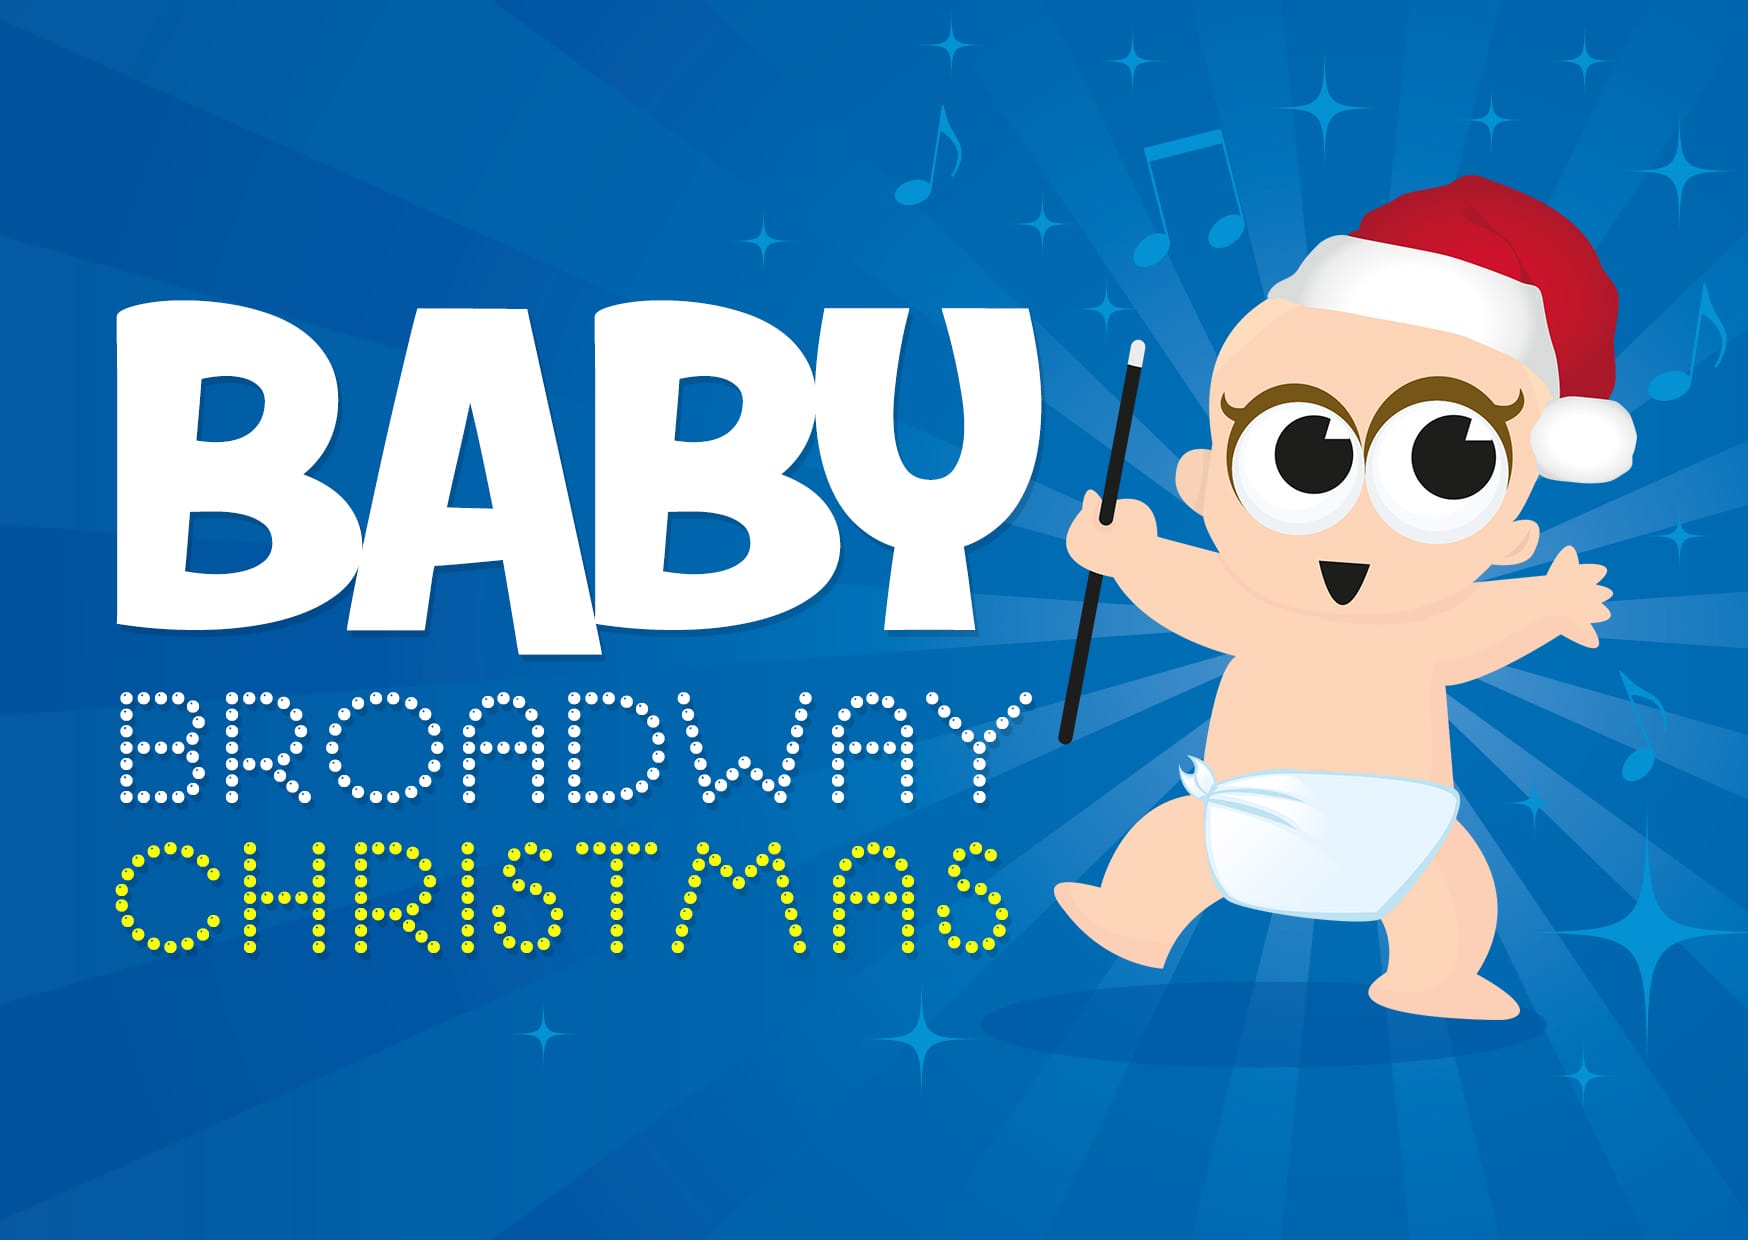 Bold text reads 'Baby Broadway Christmas' on the left side of the image. On the right, a cartoon baby wears a festive santa hat and holds a music conductor's baton. The image background is bright blue with music notes and sparkles.